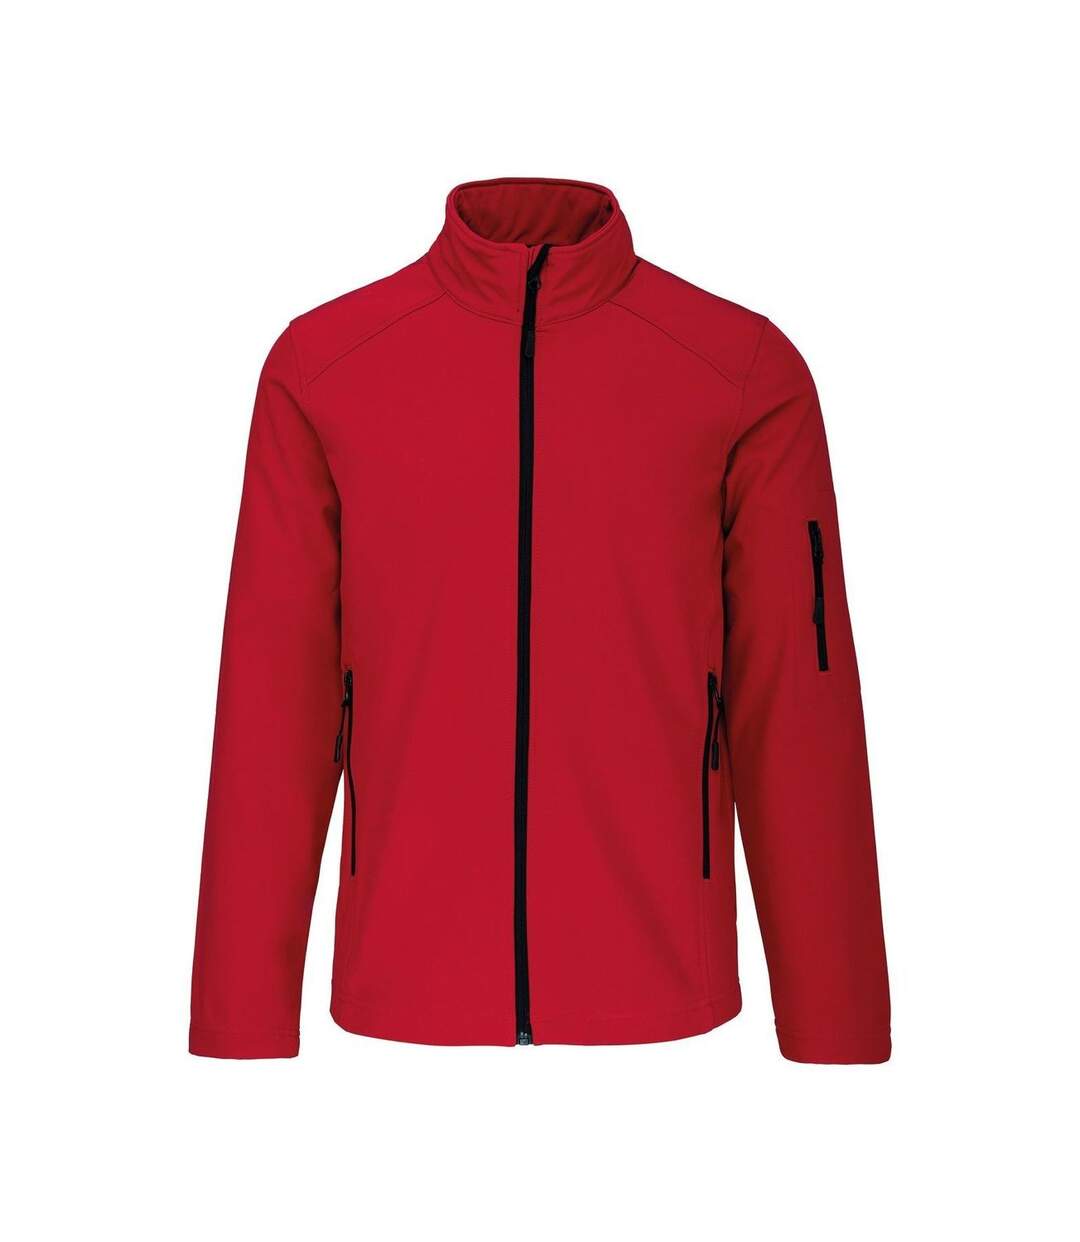 Veste softshell 3 couches - Homme - K401 - rouge